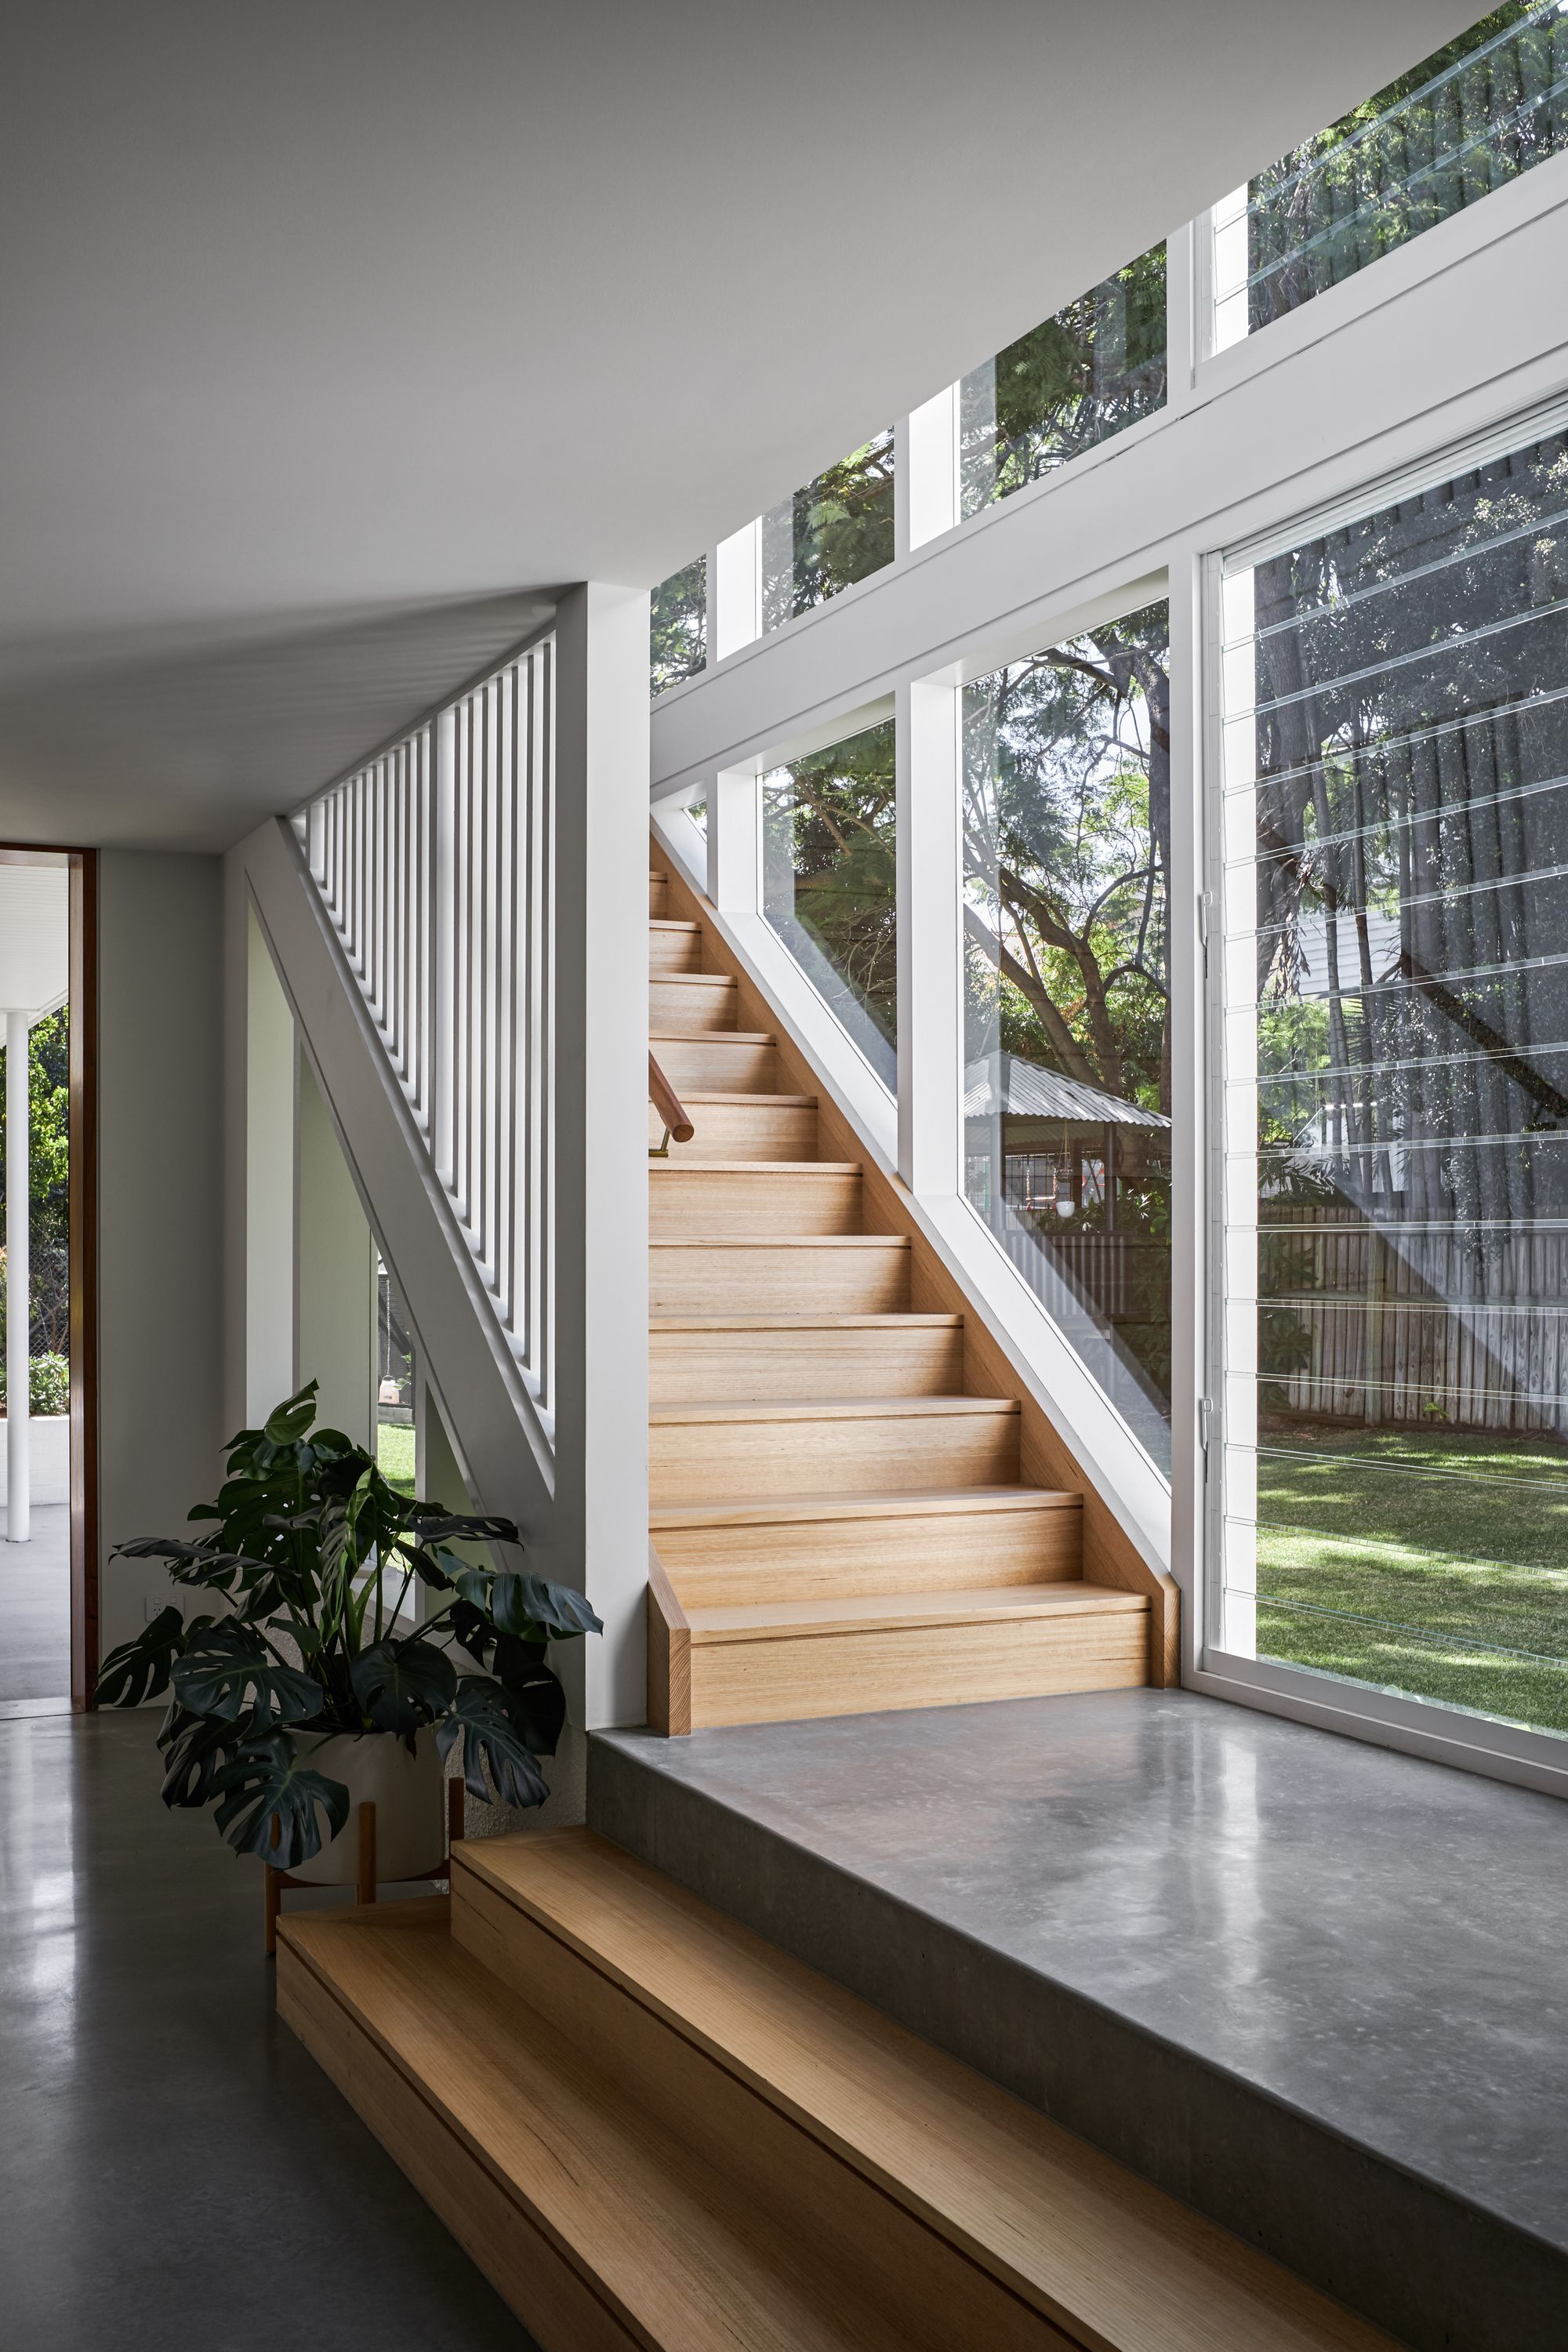 Fuller Street Cottage by DAH Architecture showing internal timber and concrete staircase